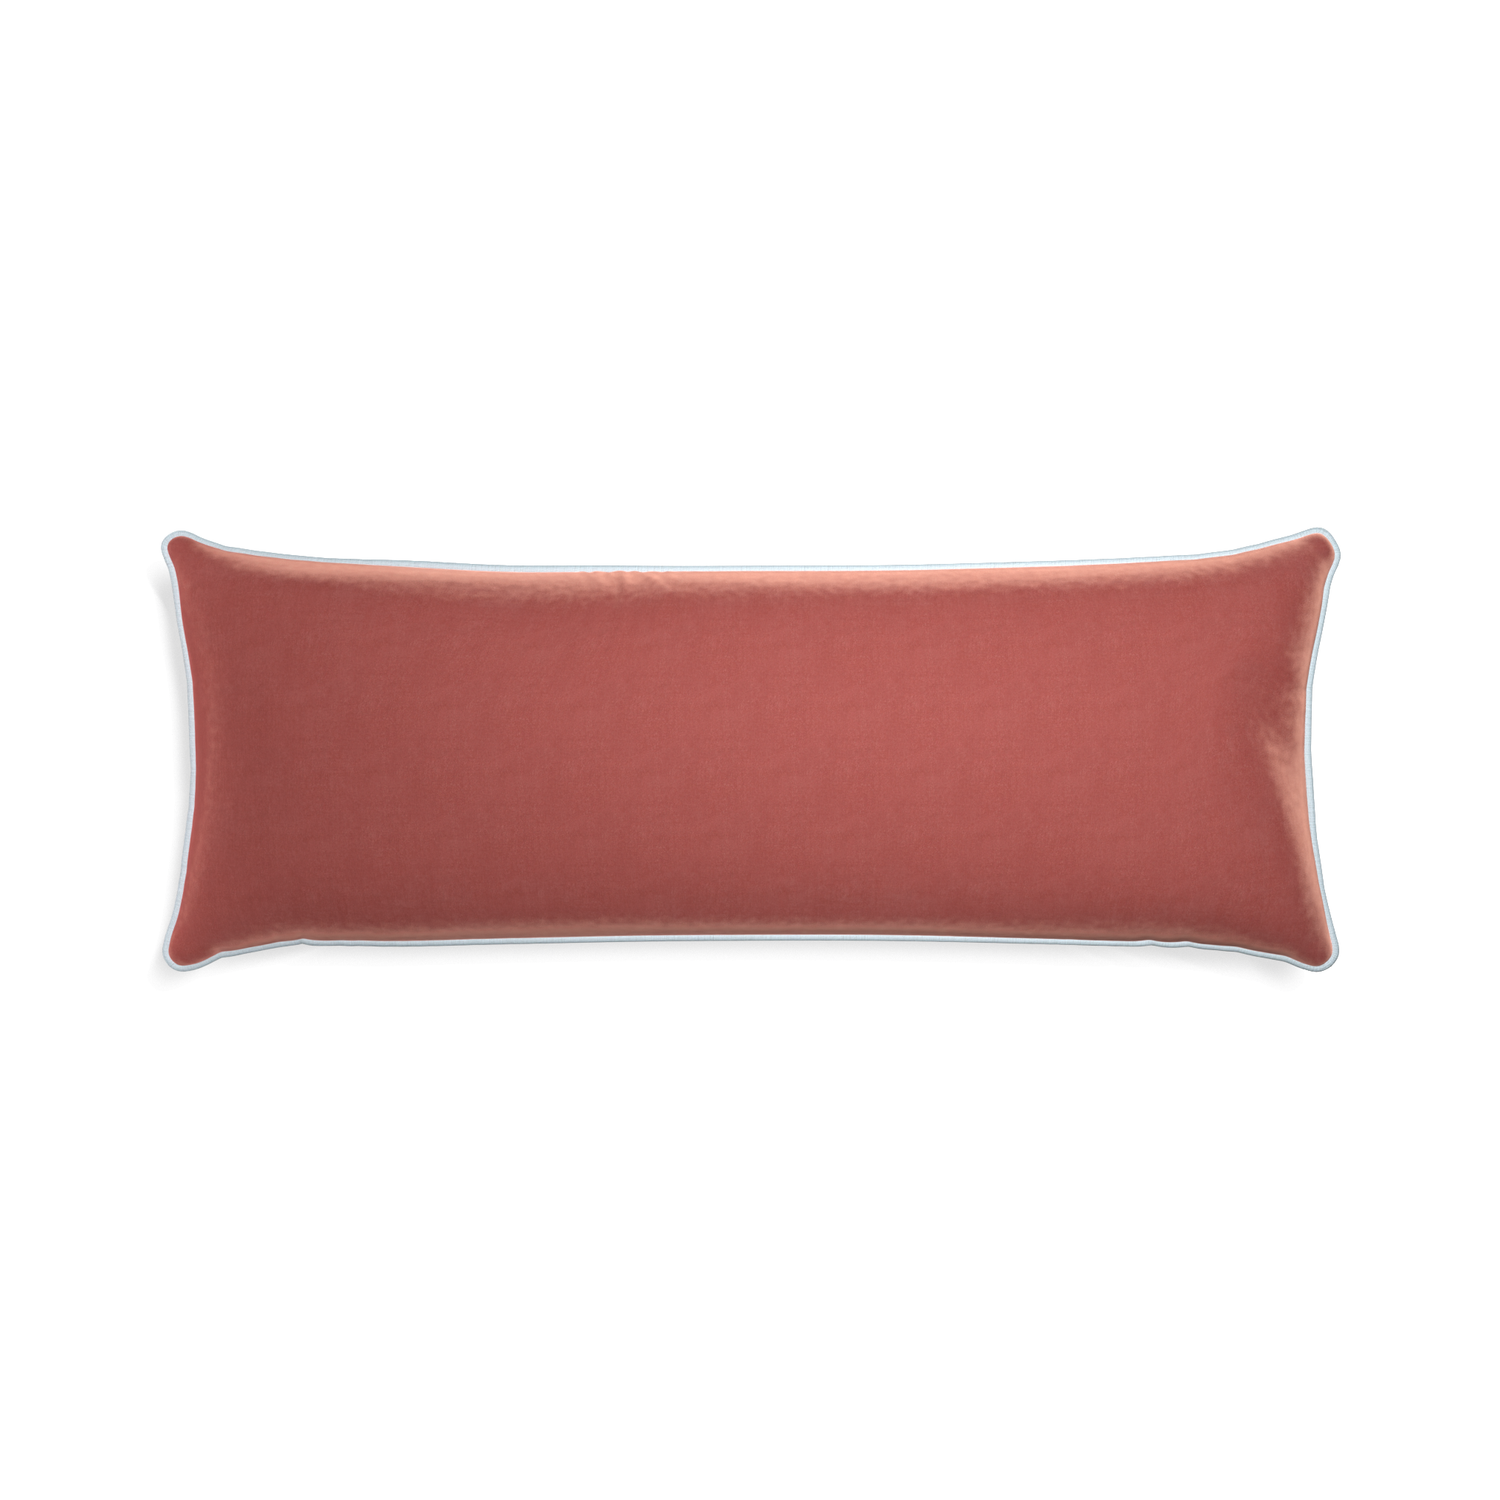 rectangle coral velvet pillow with light blue piping